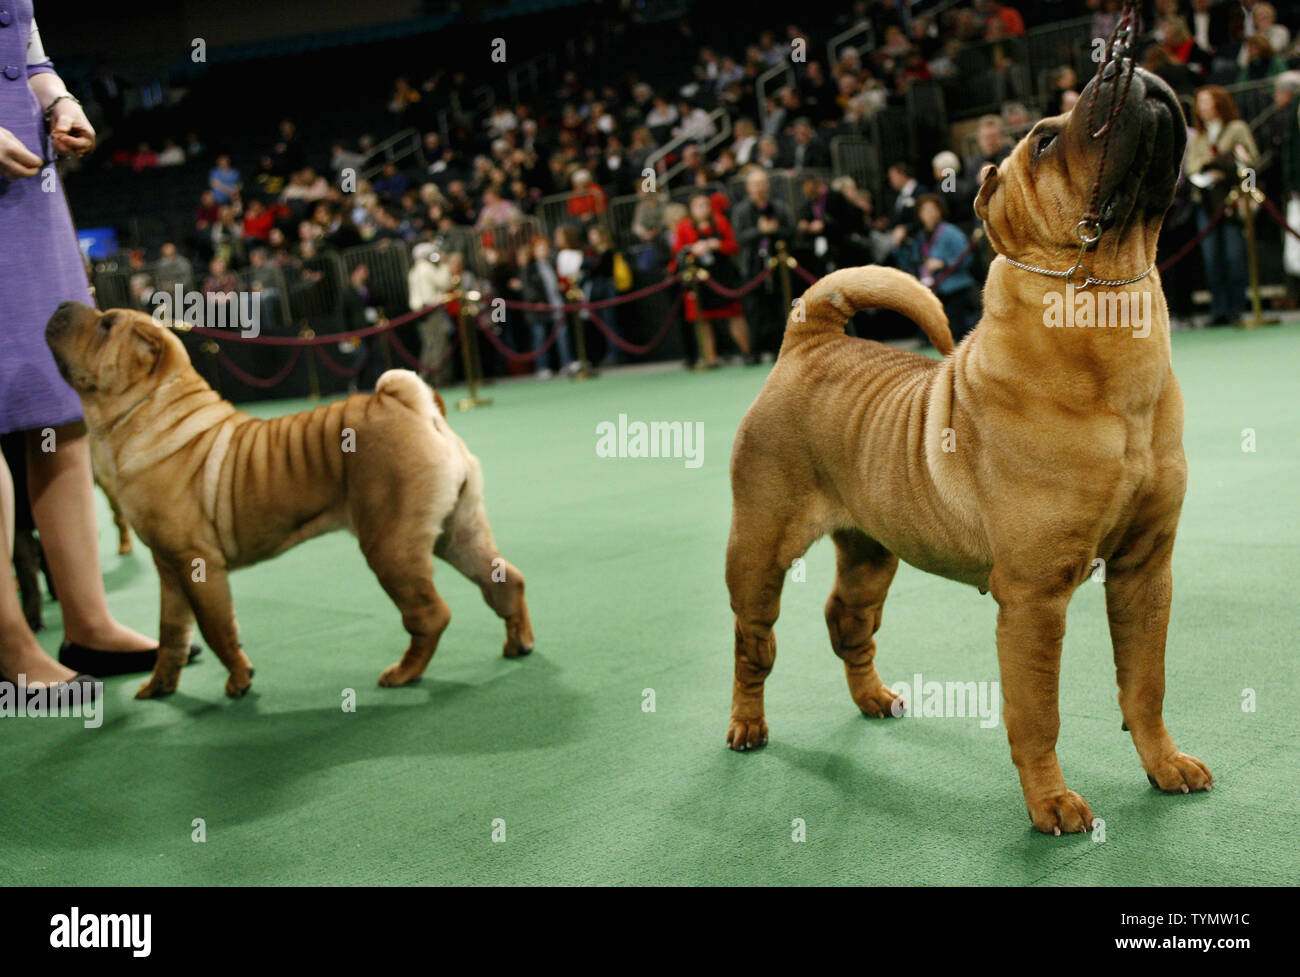 Chinese Shar Peis Are Shown At The 136th Annual Westminster Kennel